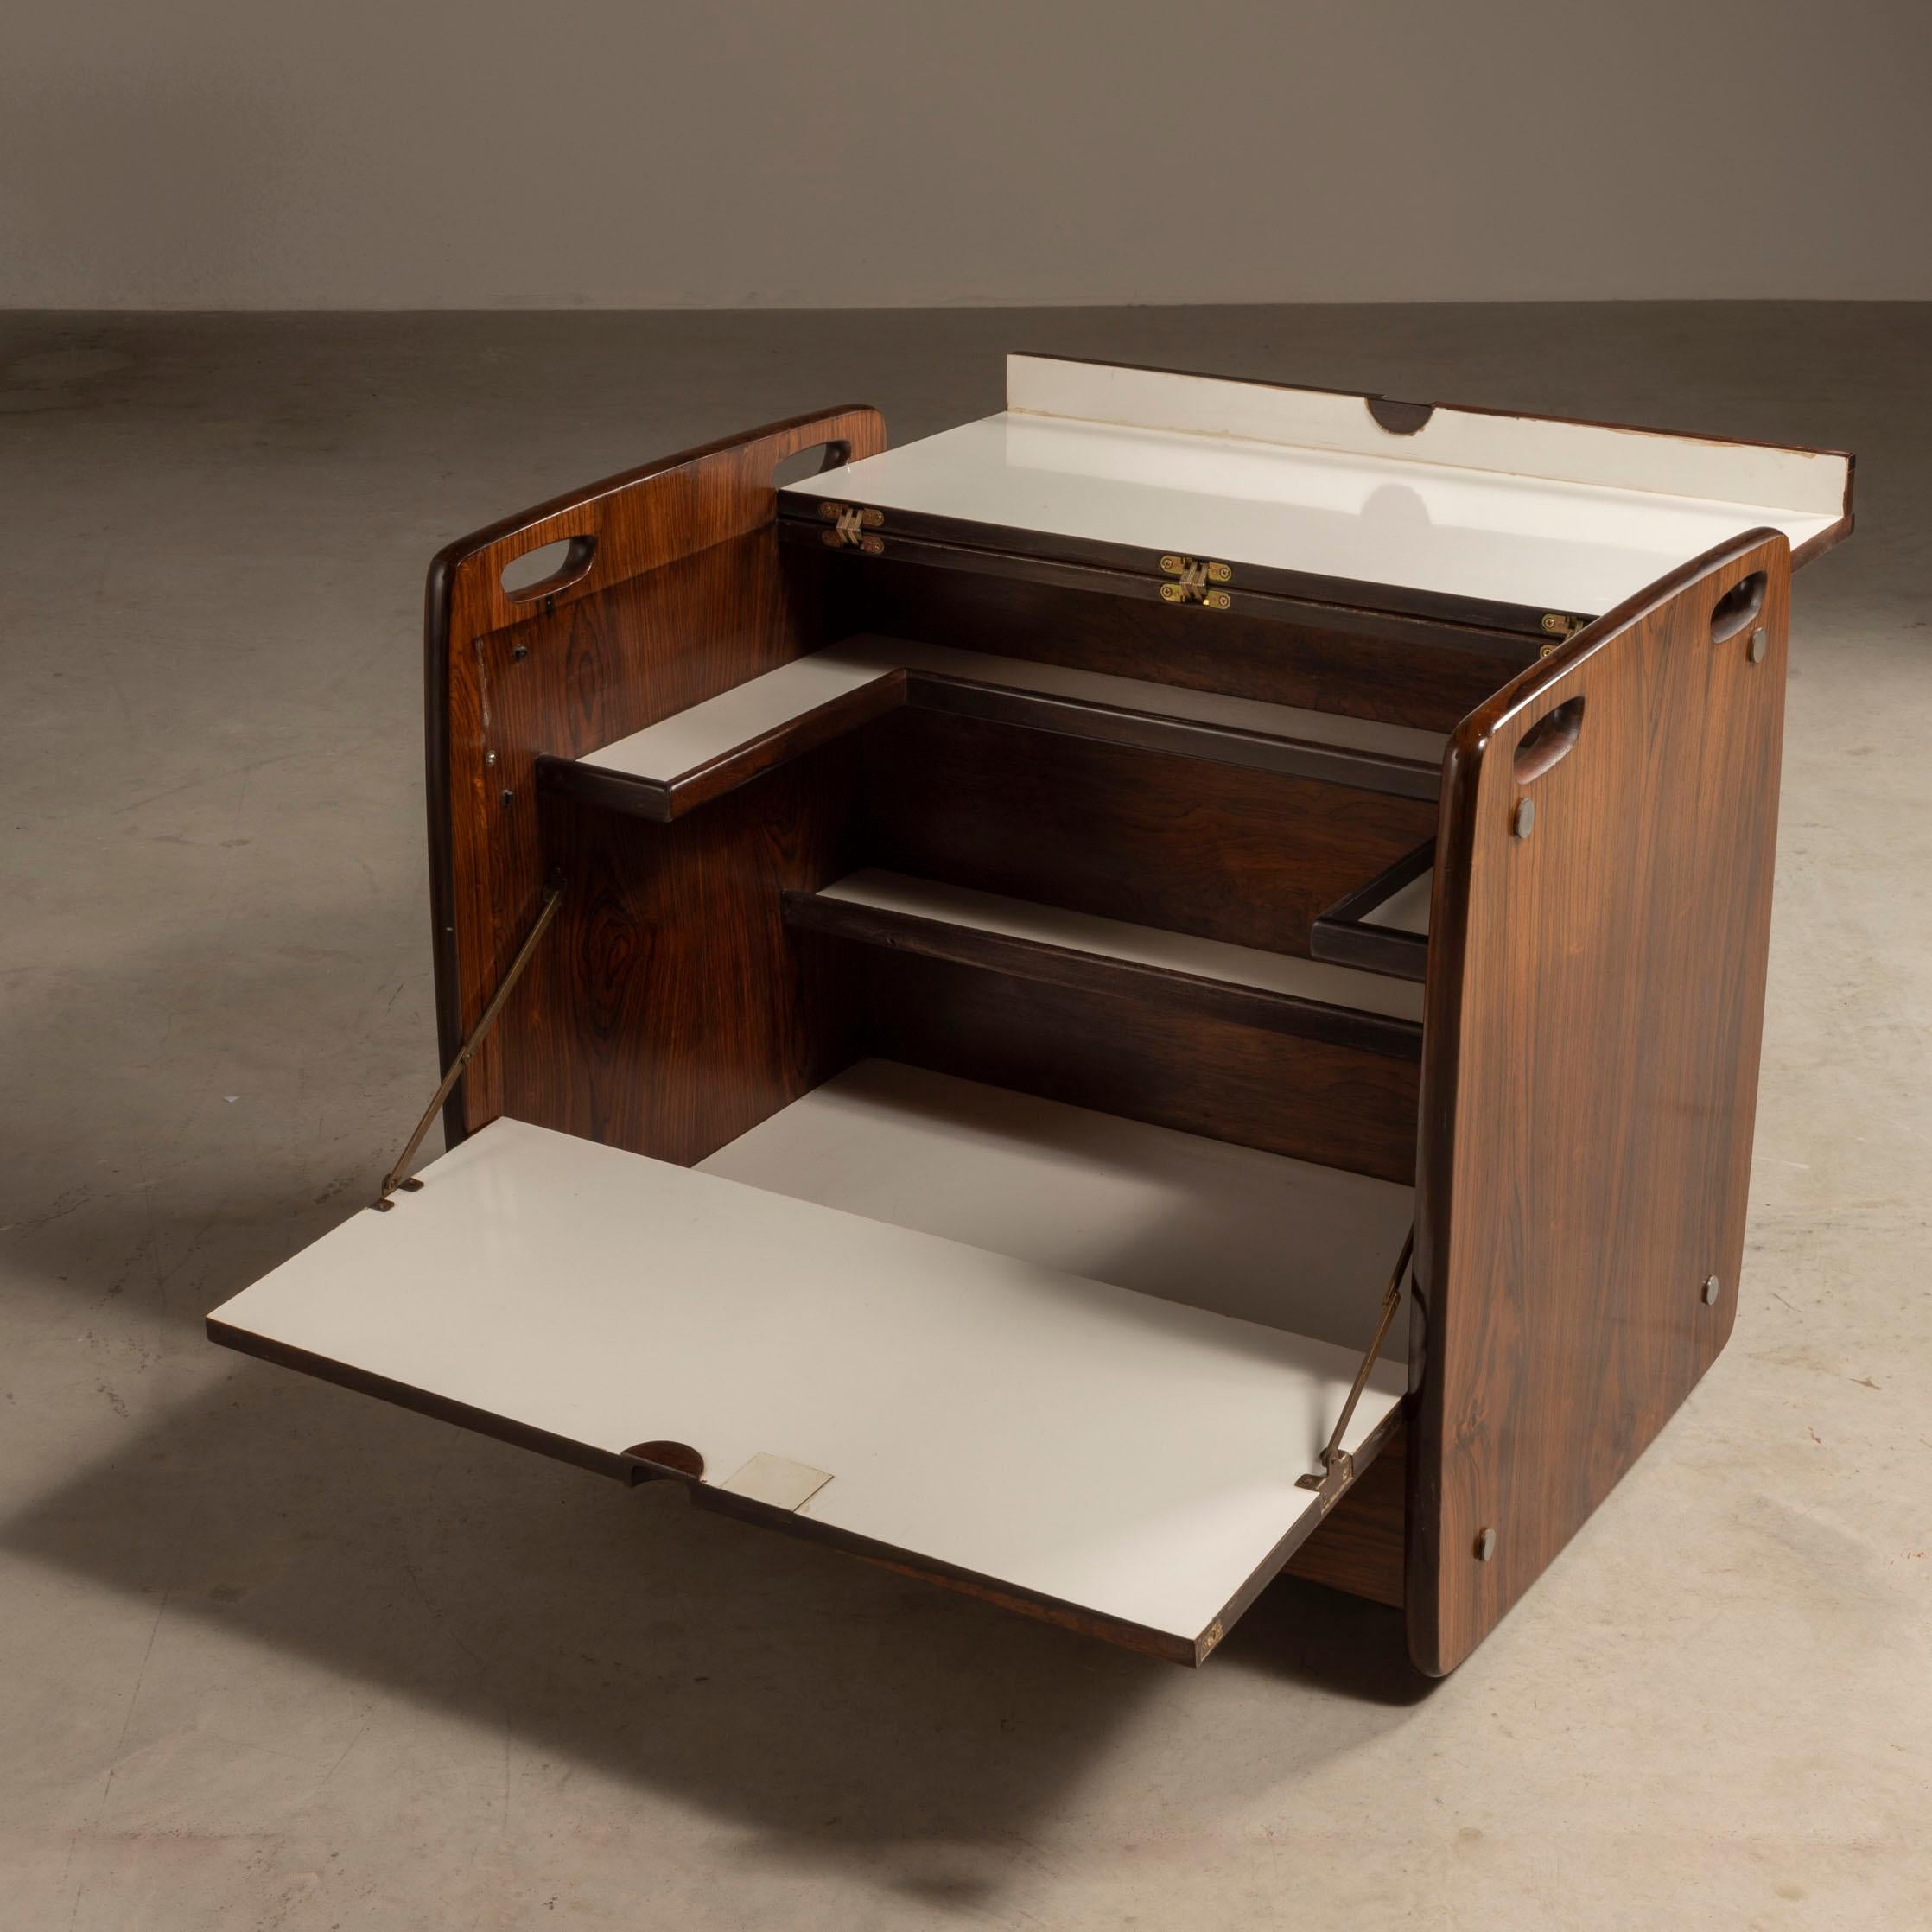 20th Century Hardwood Trolley, by Sergio Rodrigues, 1965, Brazilian Mid-Century Modern For Sale